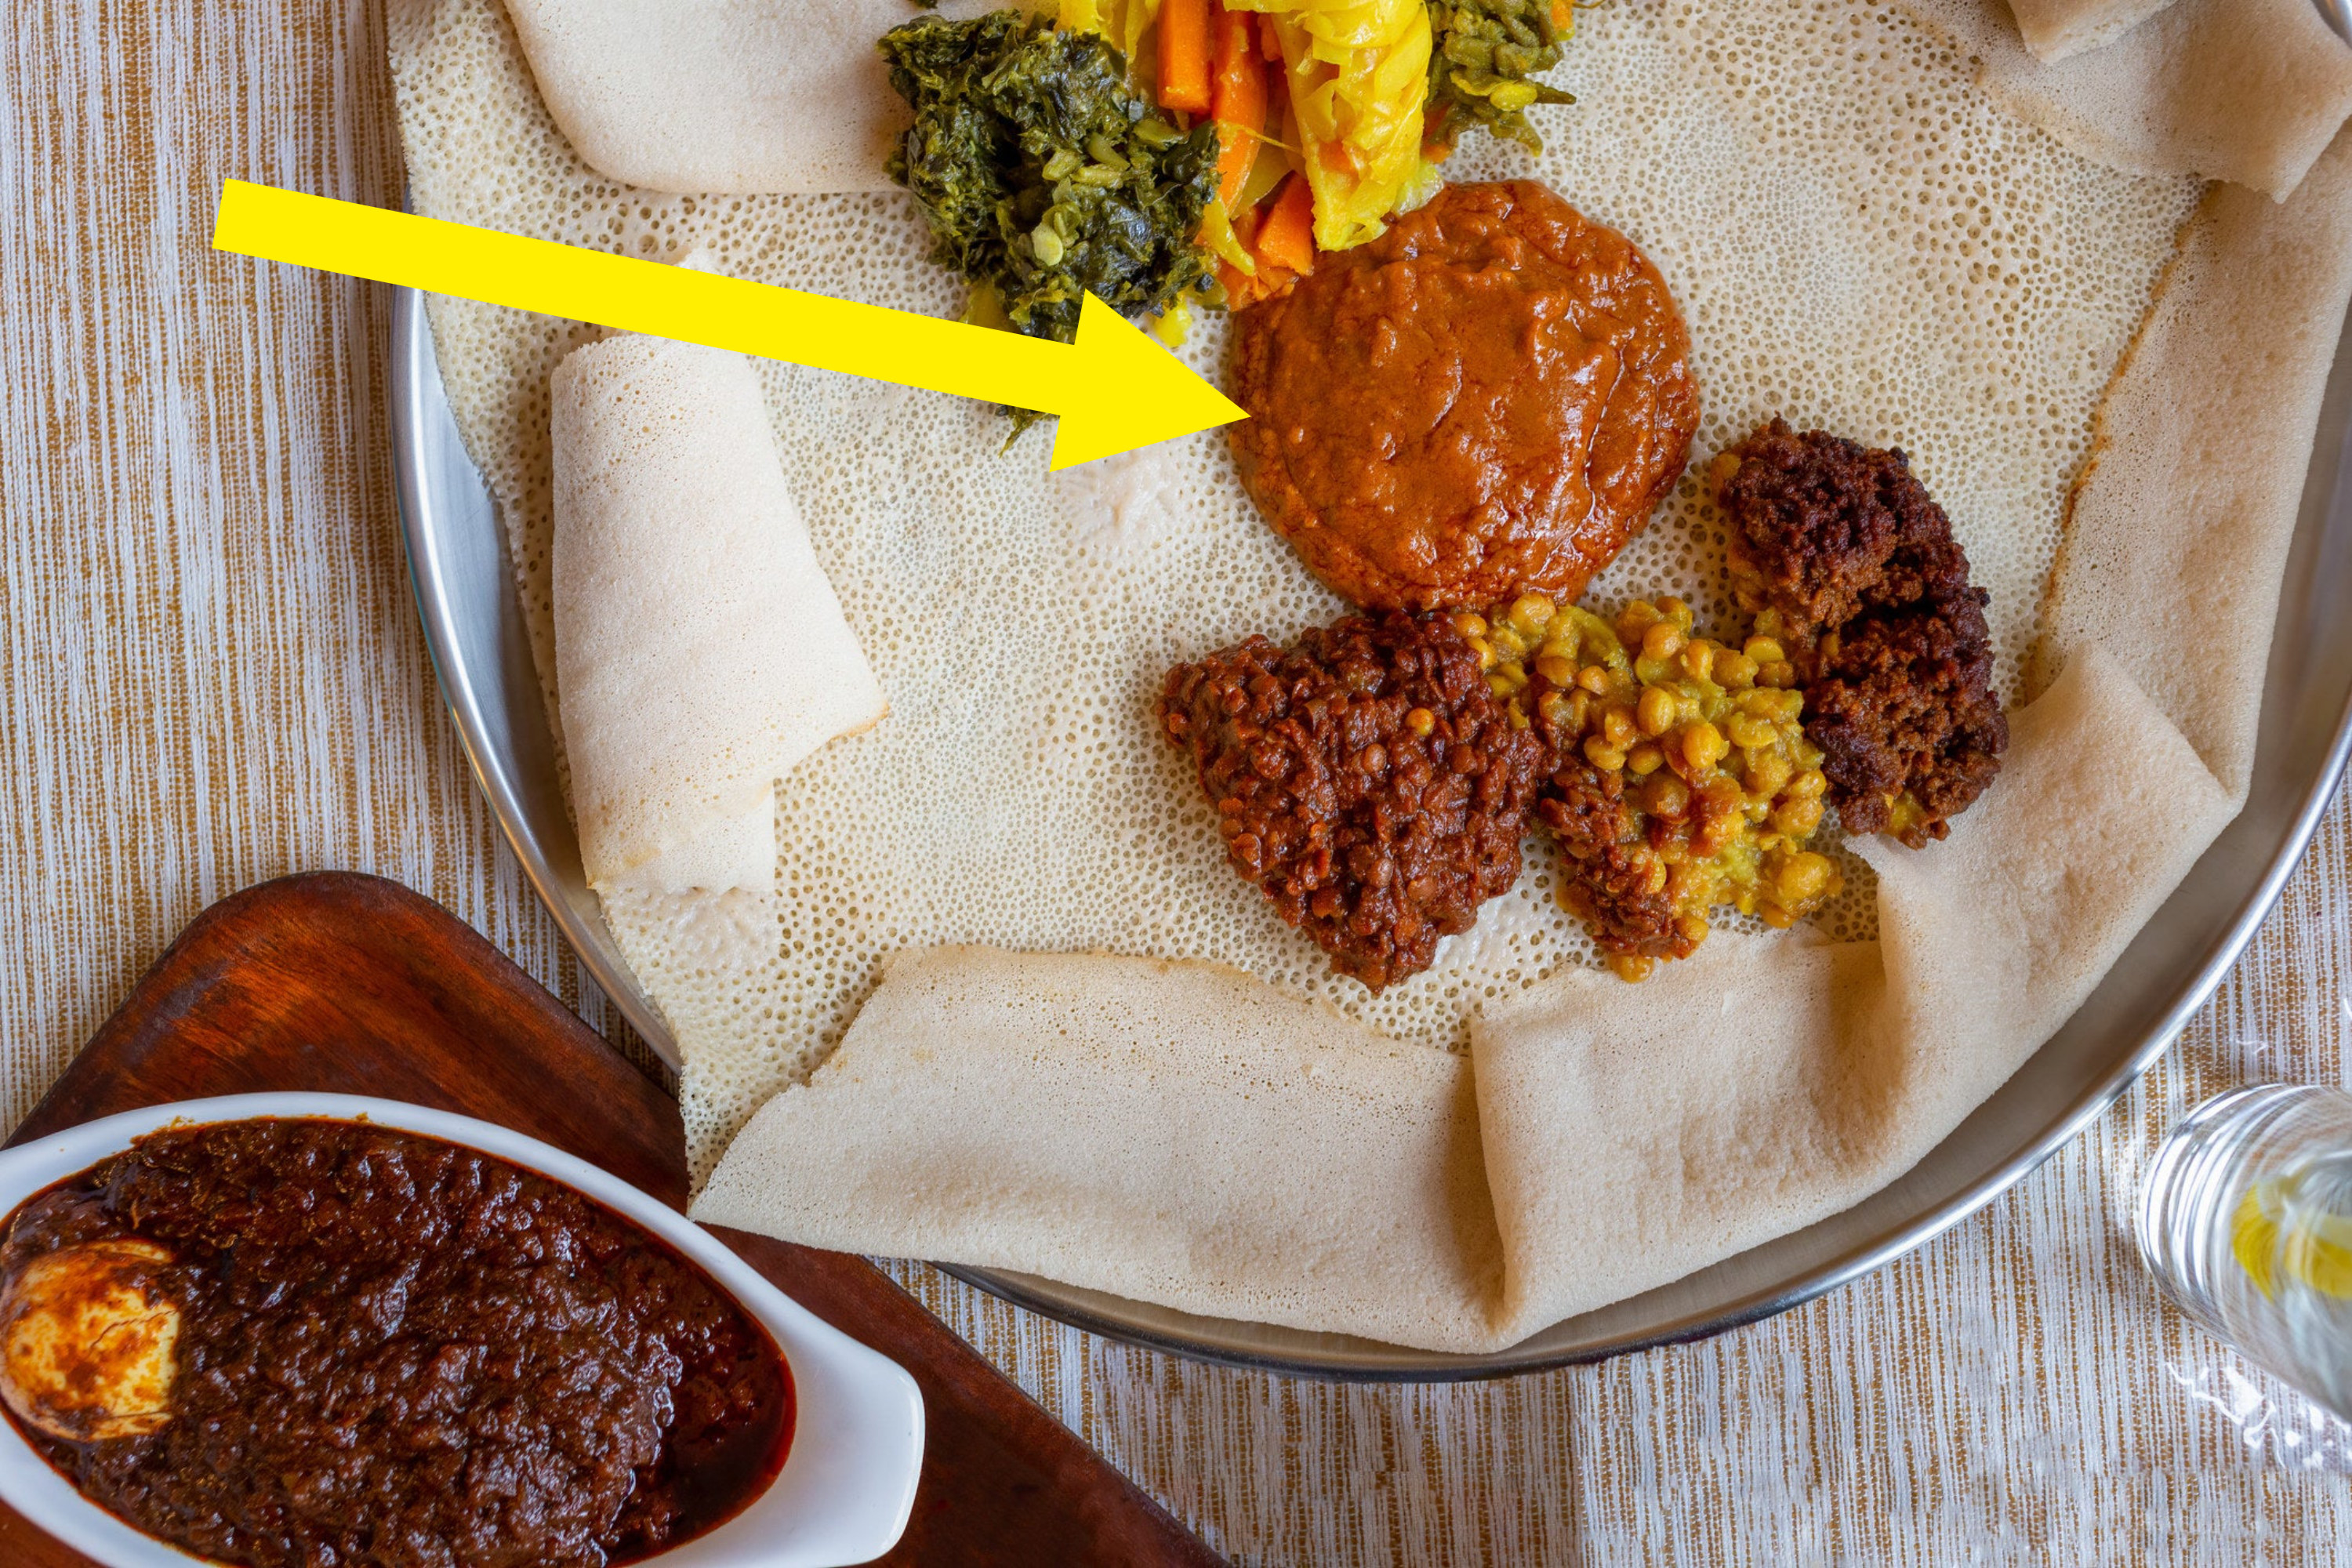 Ethiopian food and berbere spice sauce.